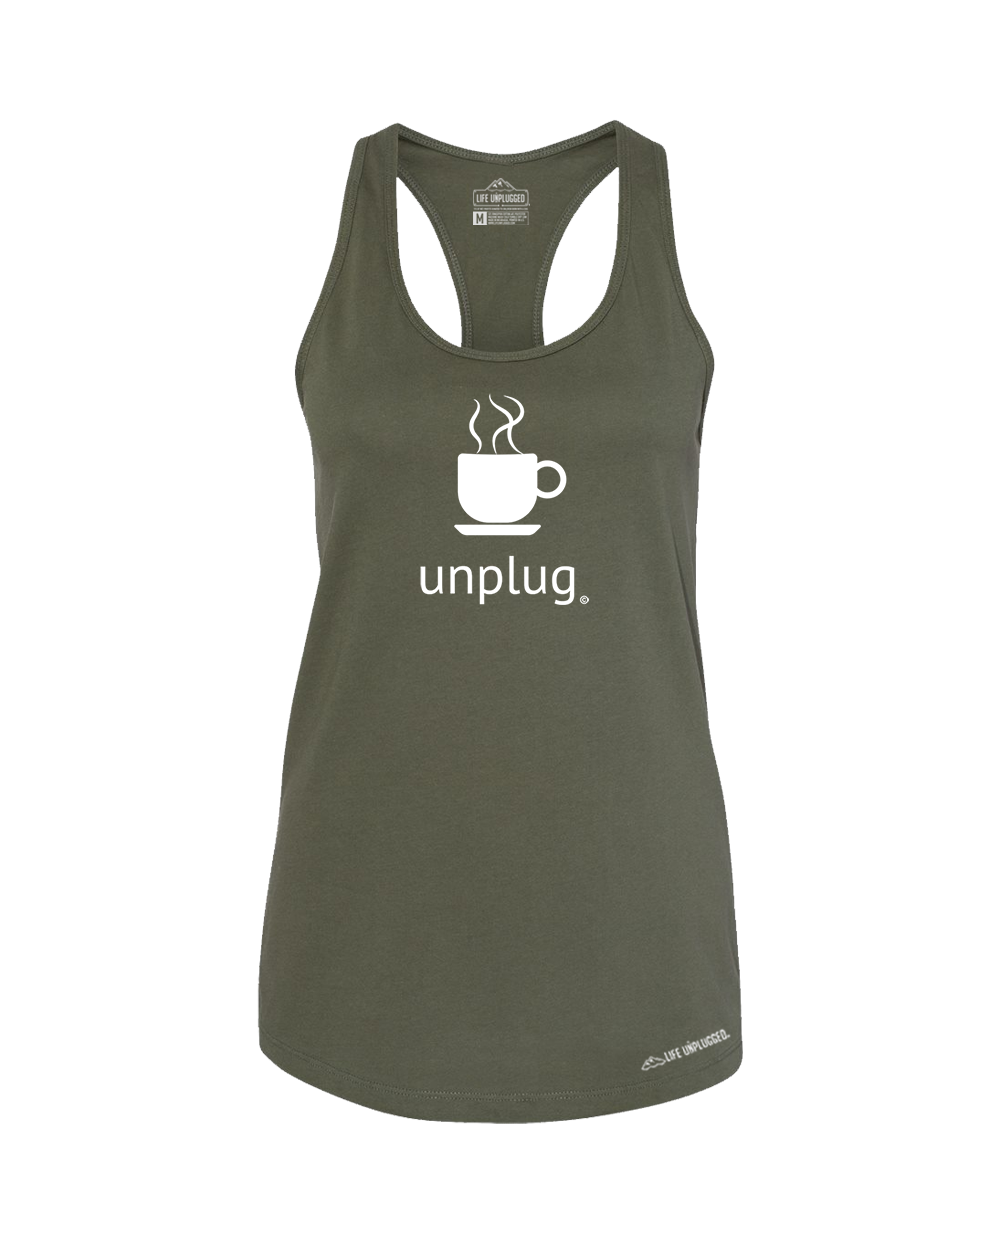 Coffee Premium Women's Relaxed Fit Racerback Tank Top - Life Unplugged